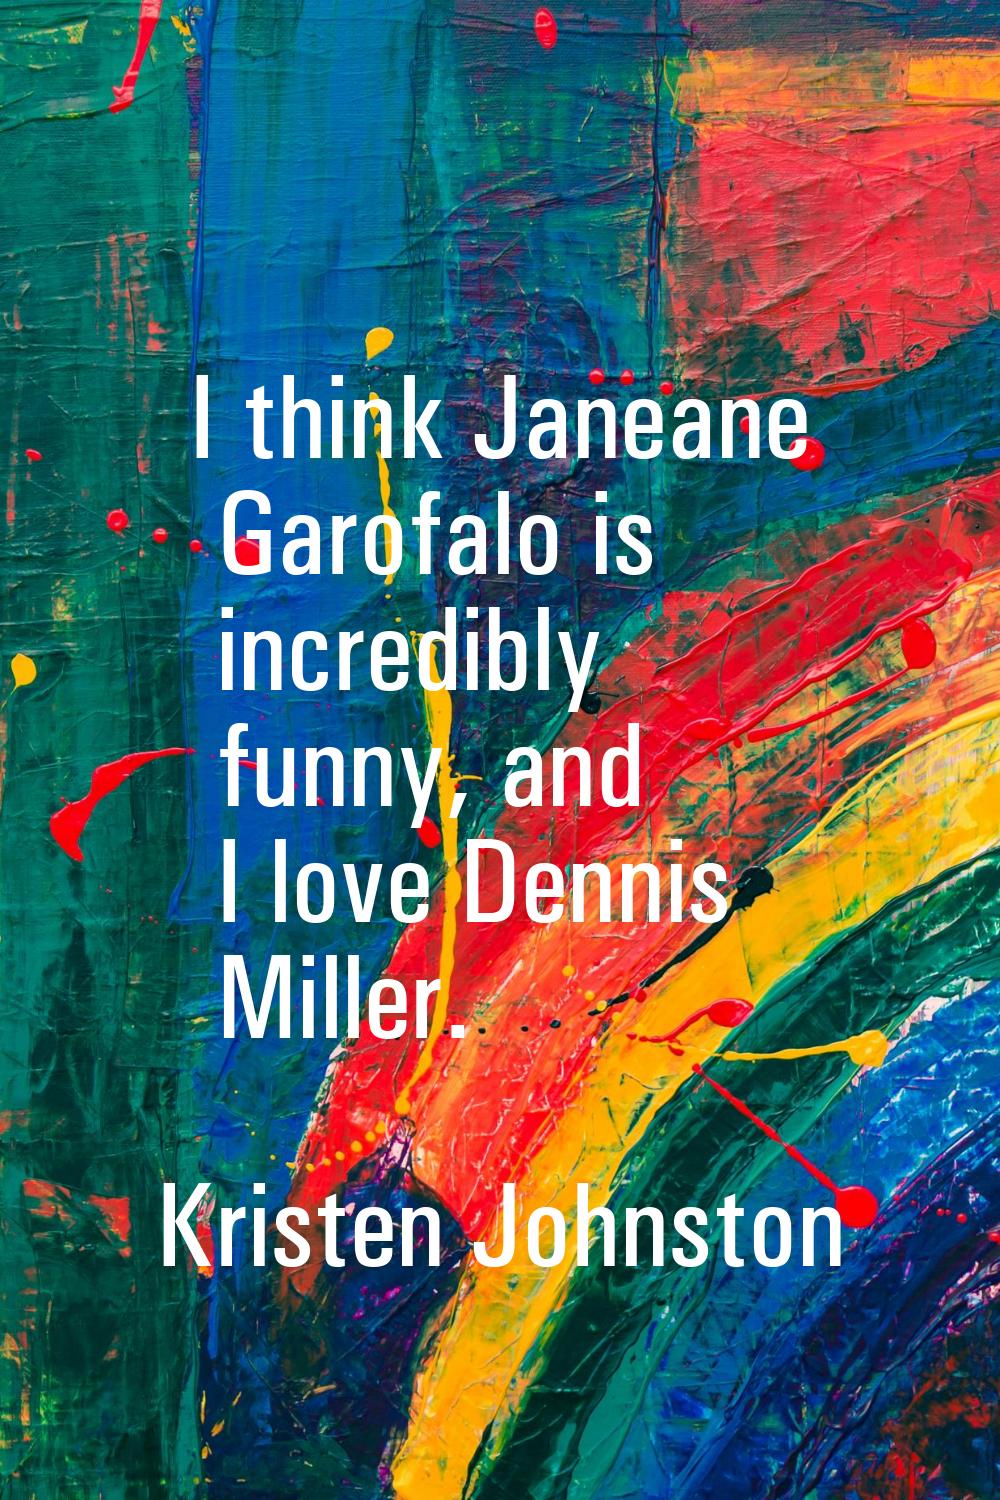 I think Janeane Garofalo is incredibly funny, and I love Dennis Miller.